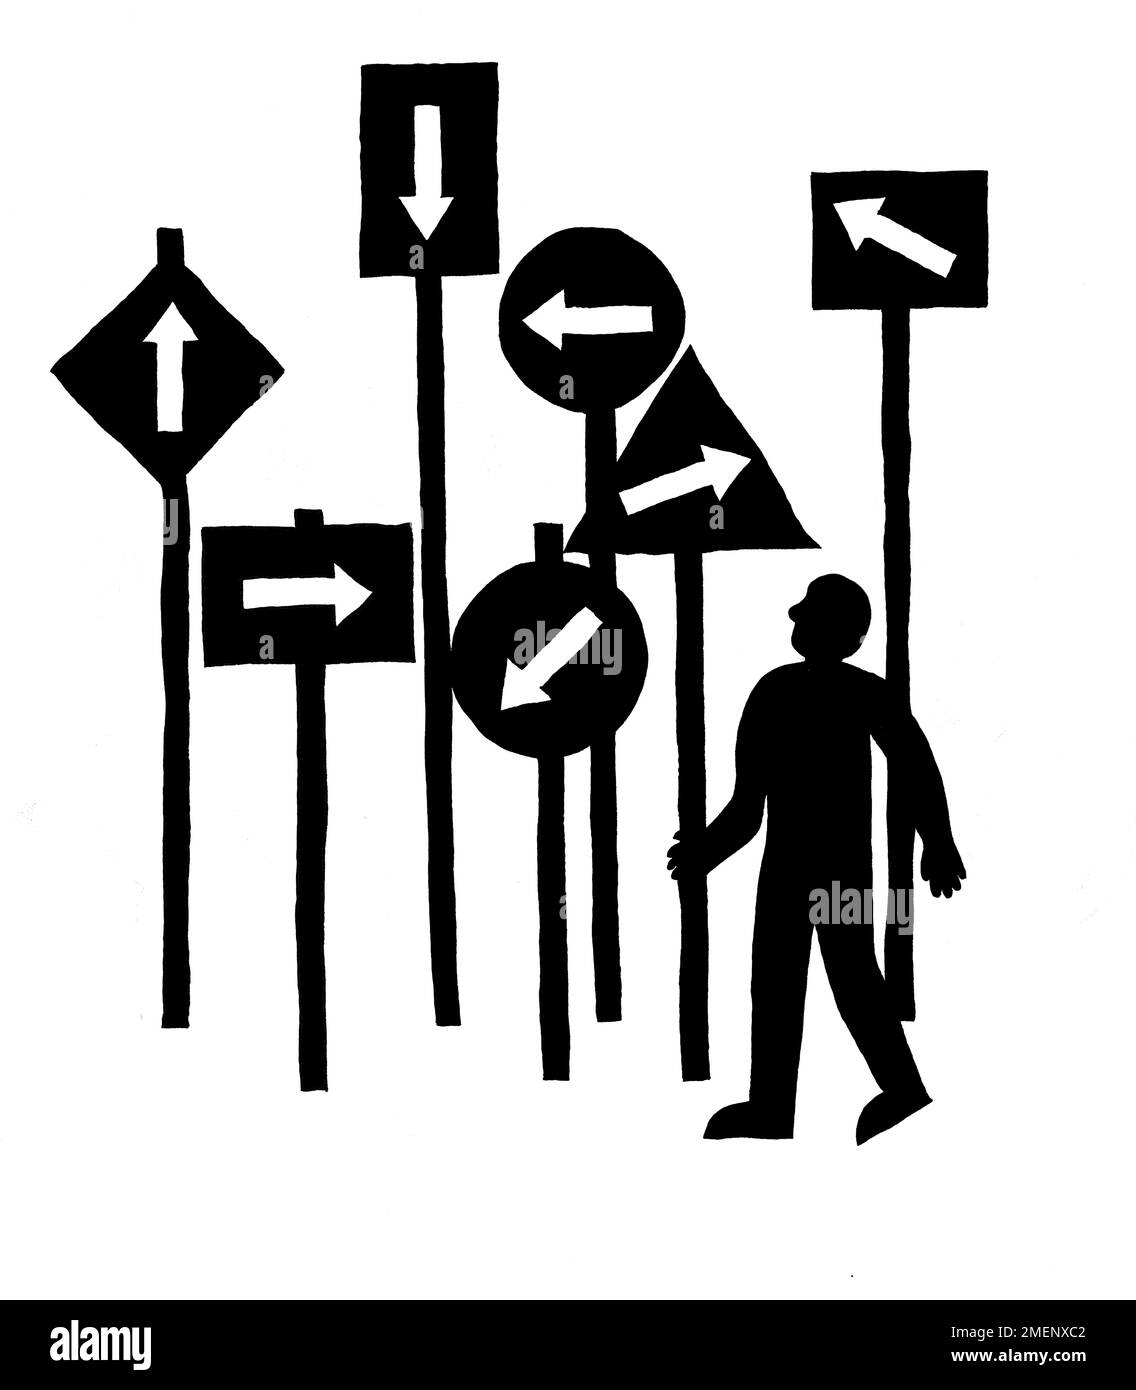 Black and white illustration of person looking up at signs all pointing in different directions Stock Photo